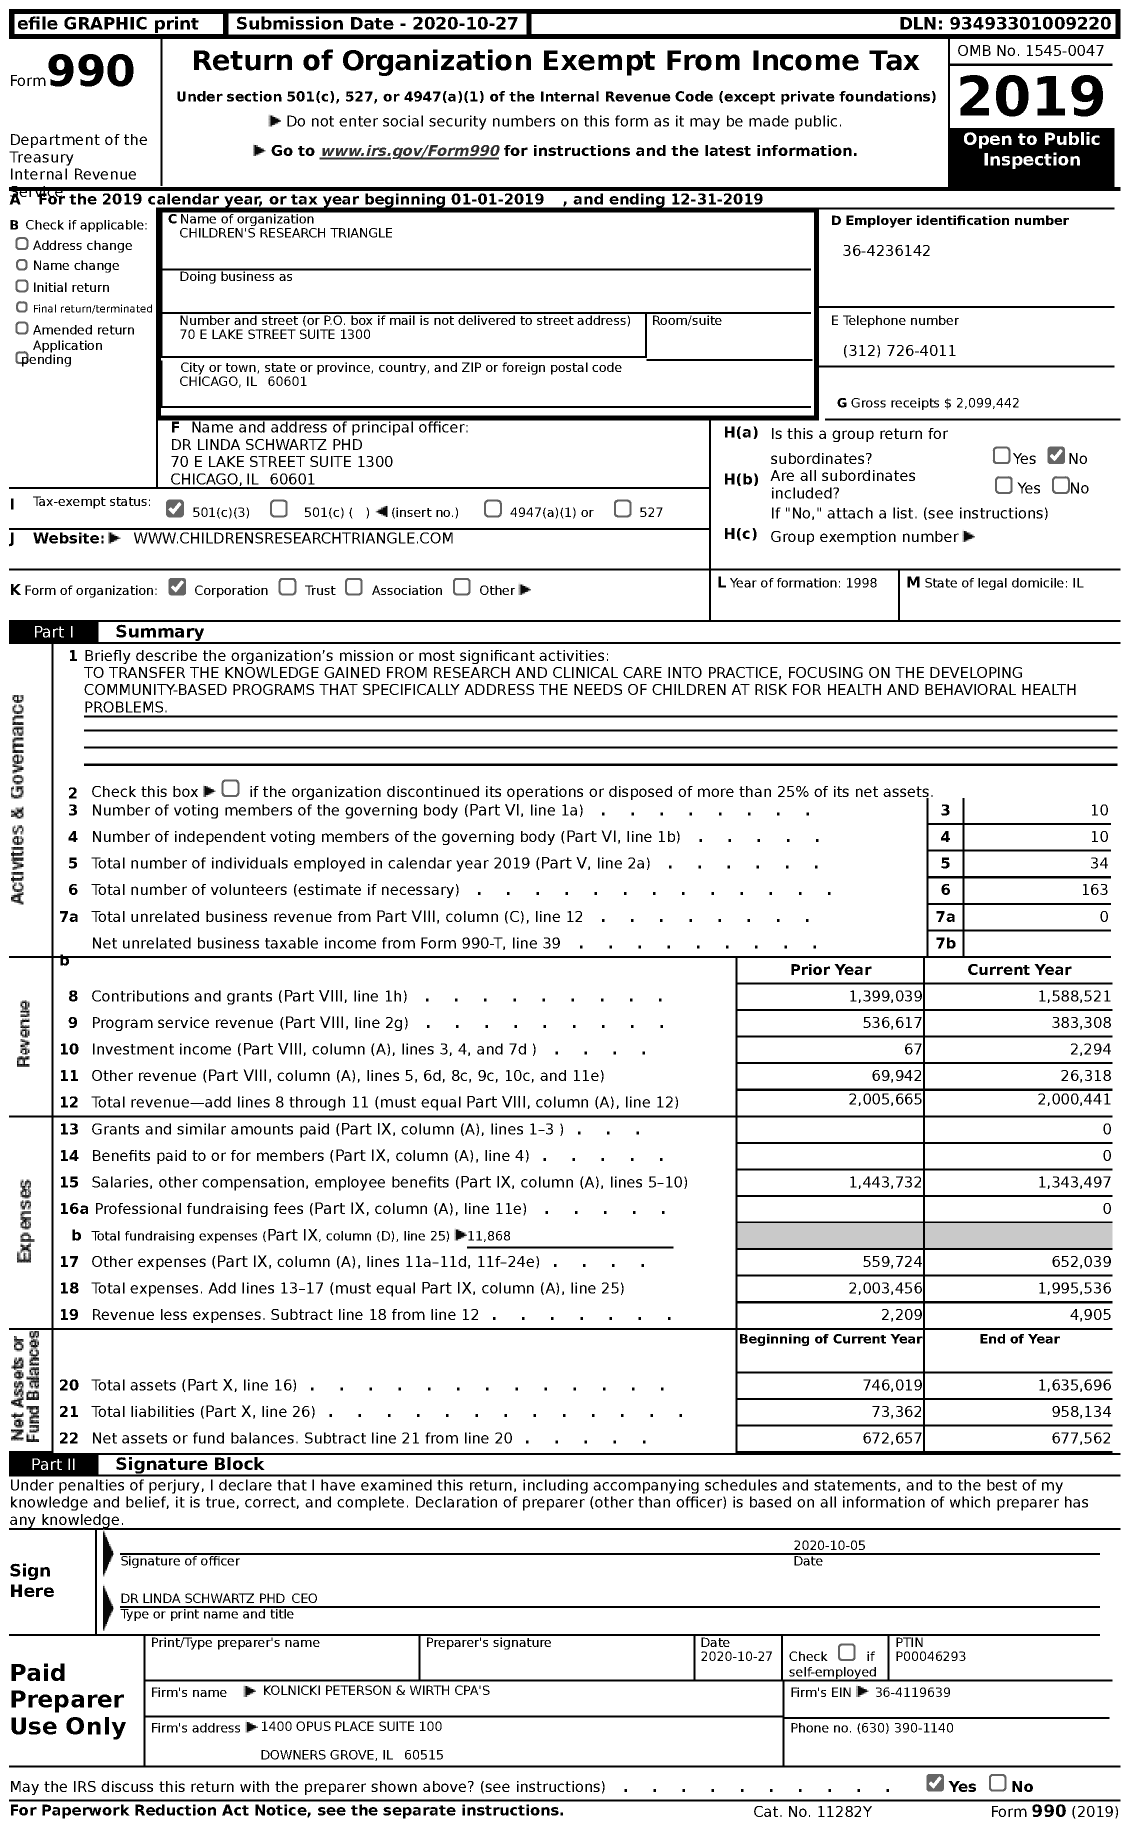 Image of first page of 2019 Form 990 for Children's Research Triangle (CRT)